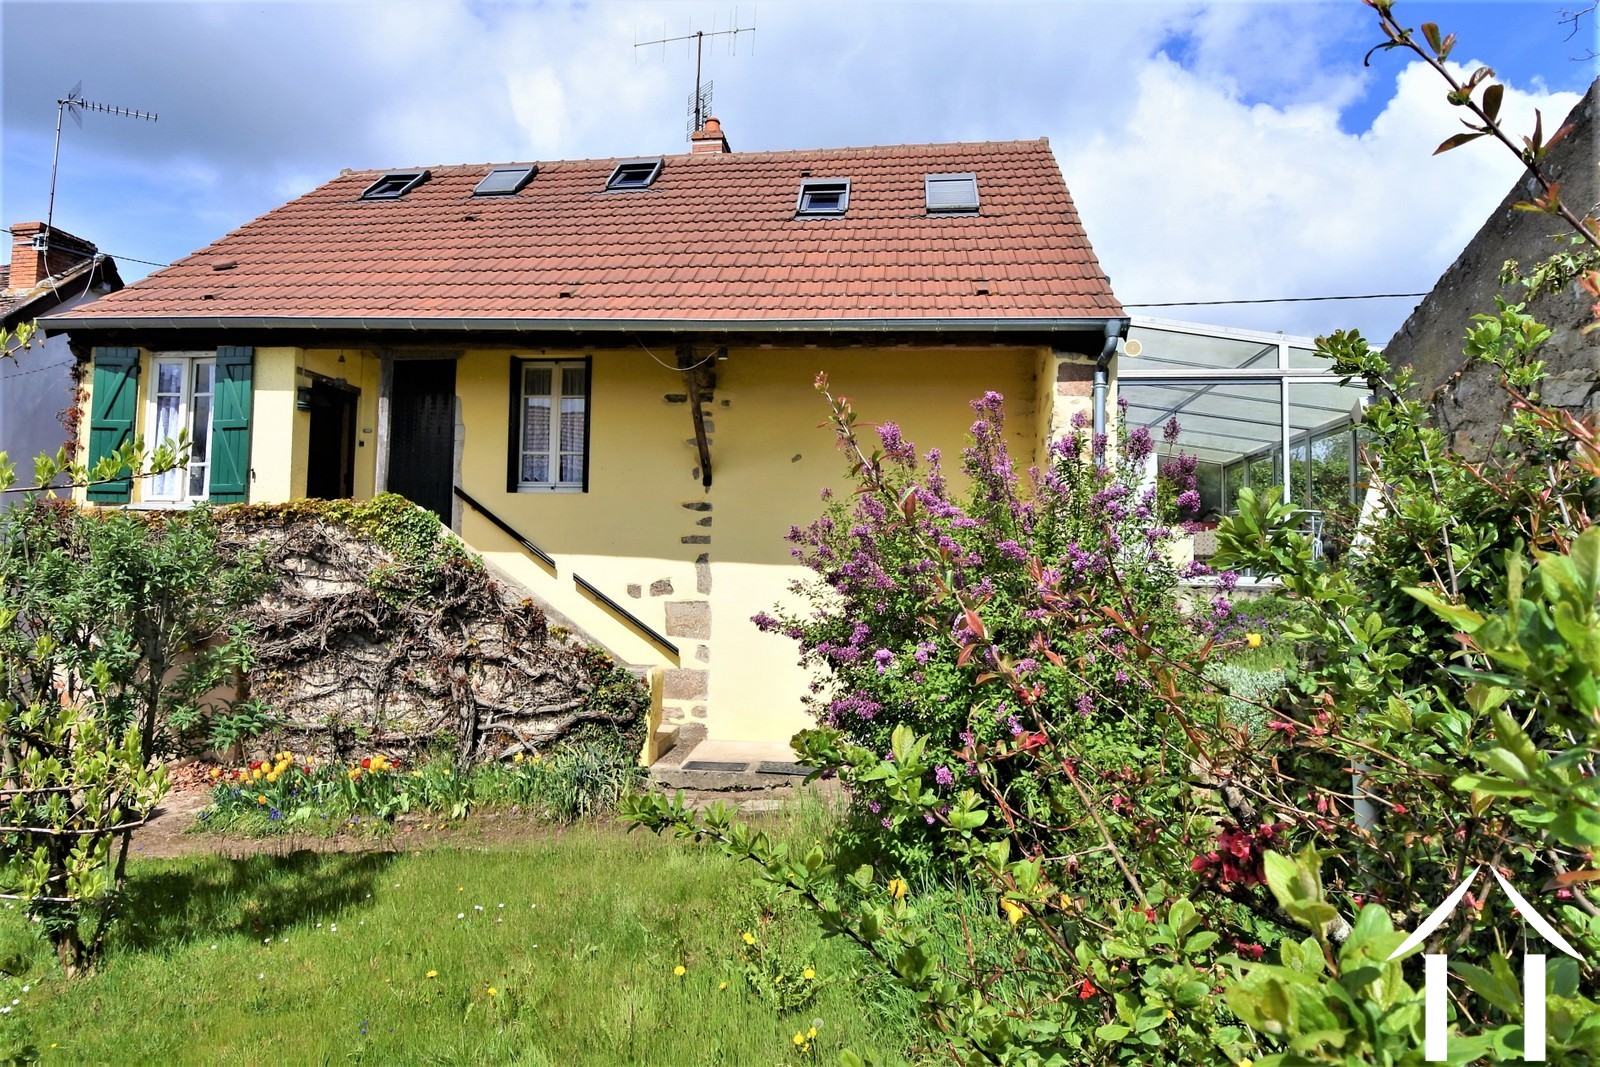 Quaint 2 bedroom stone house with small garden and a view